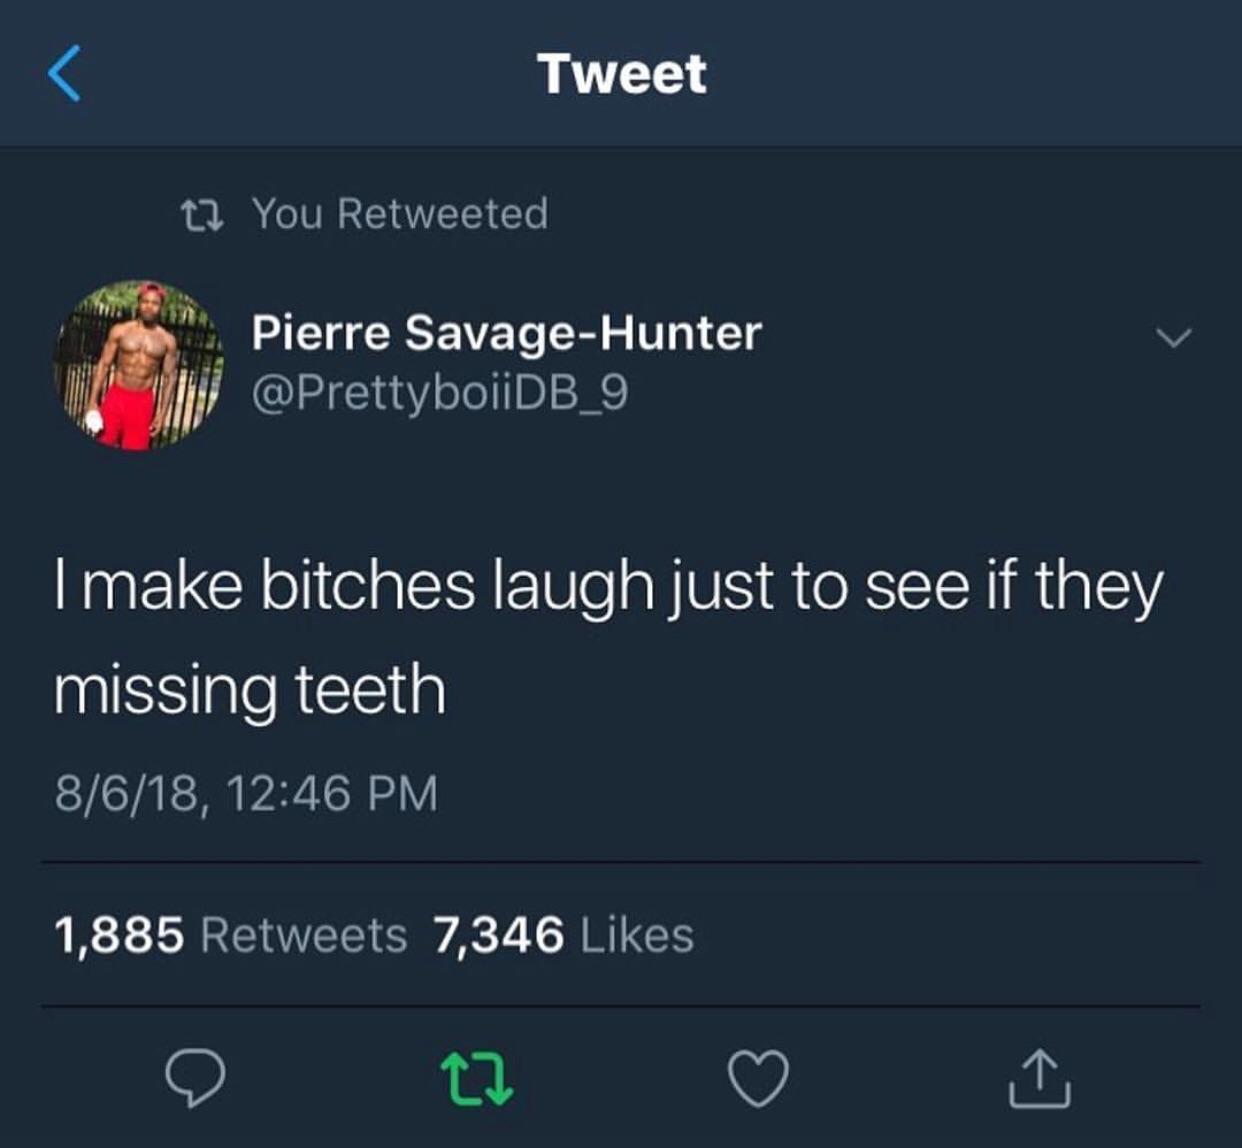 quote hood twitter - Tweet t2 You Retweeted Pierre SavageHunter Imake bitches laugh just to see if they missing teeth 8618, 1,885 7,346